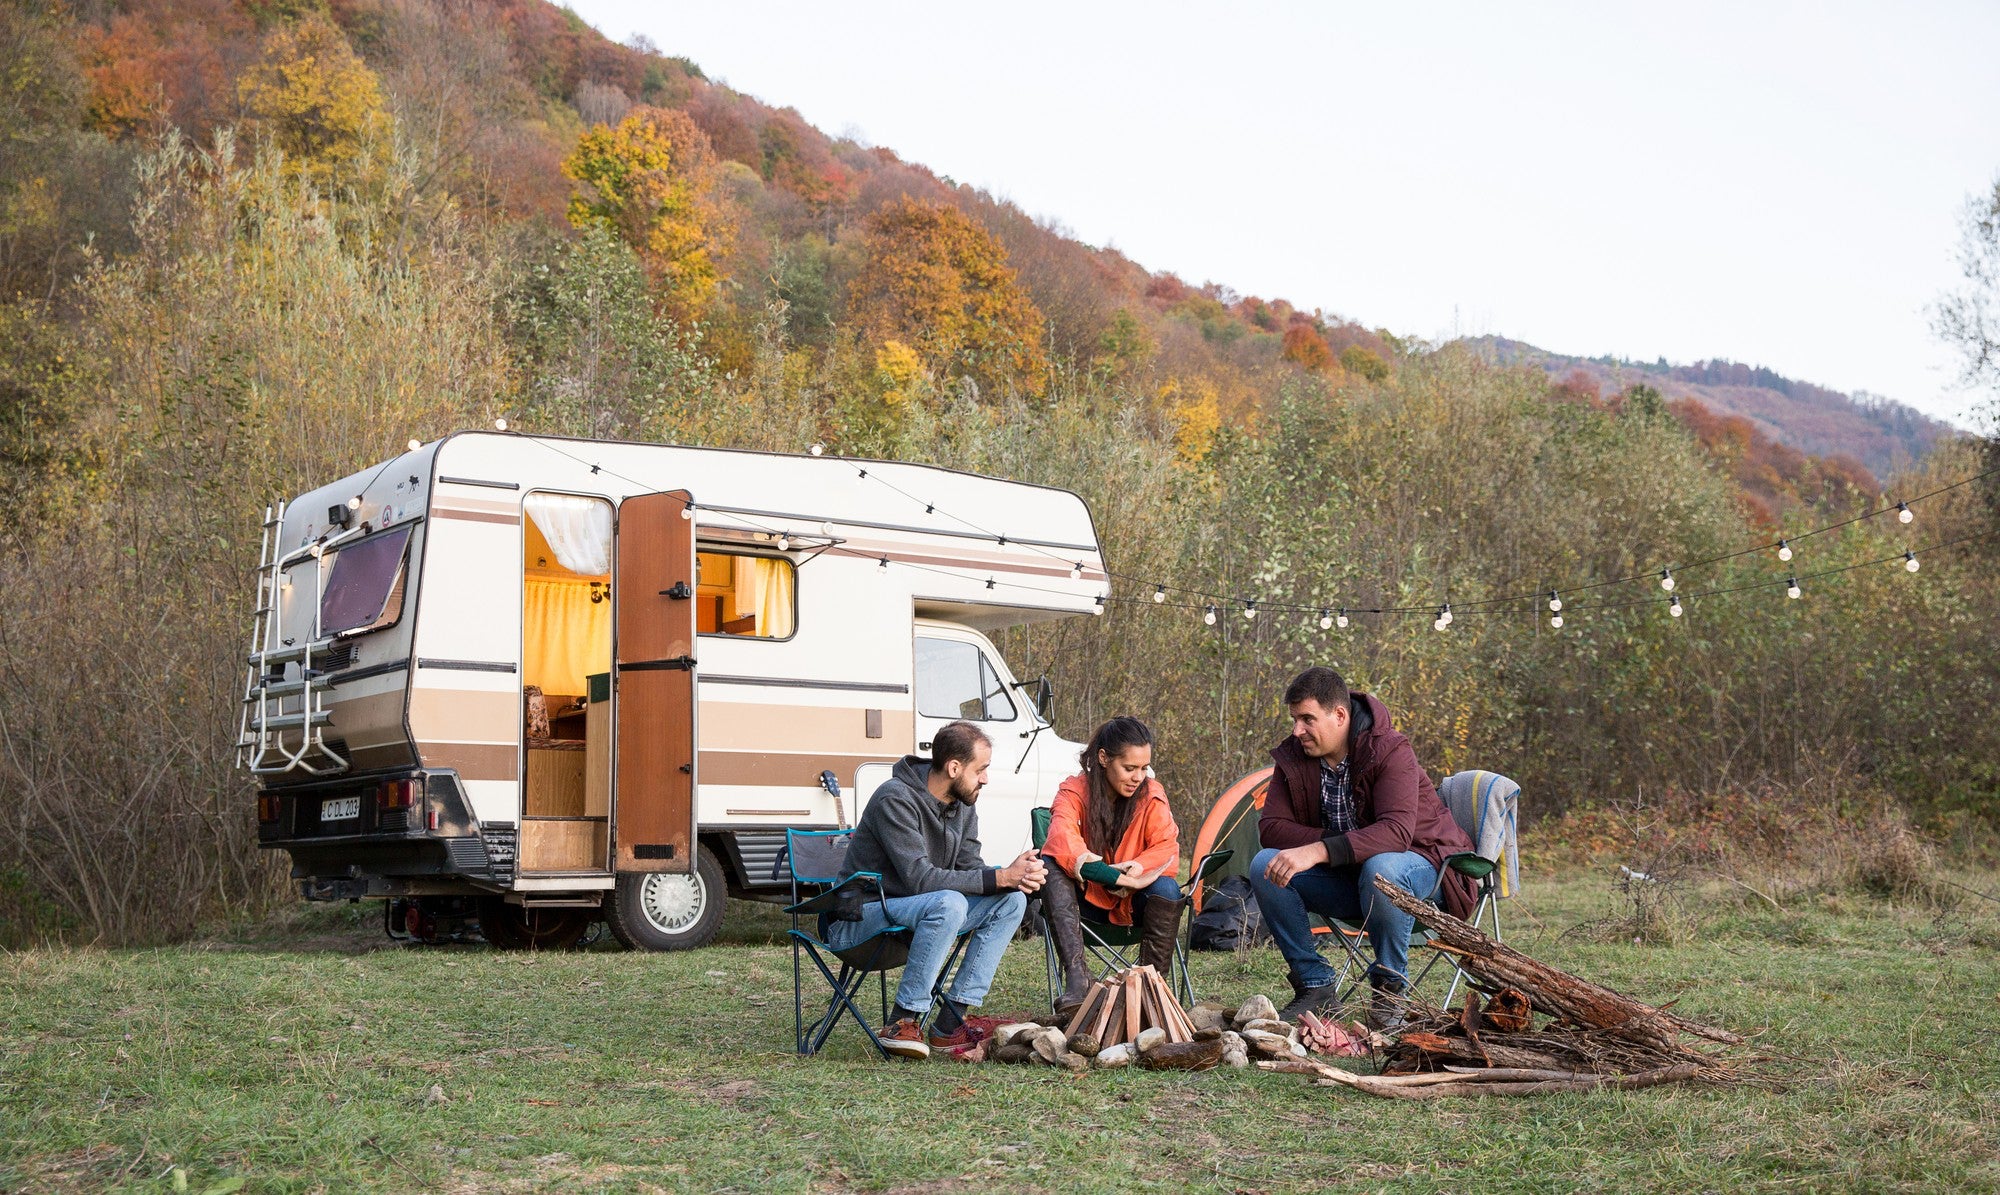 Best Maintenance Tips for RV, Travel Trailers, and Campers